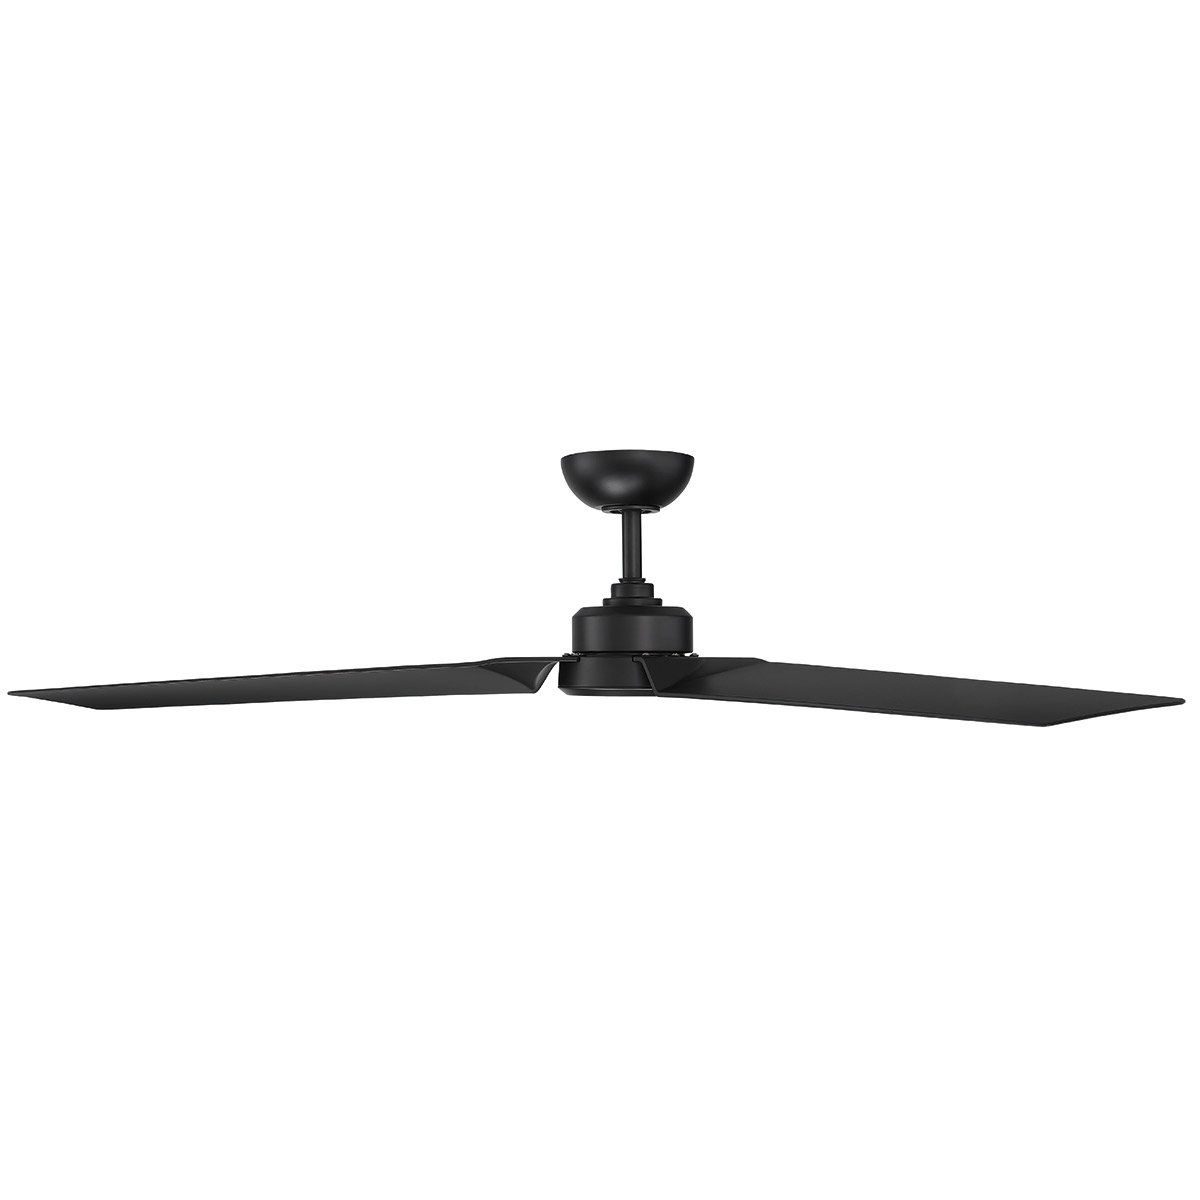 Latest Roboto 3 Blade Outdoor Led Smart Ceiling Fan With Regard To Defelice 3 Blade Ceiling Fans (View 9 of 20)